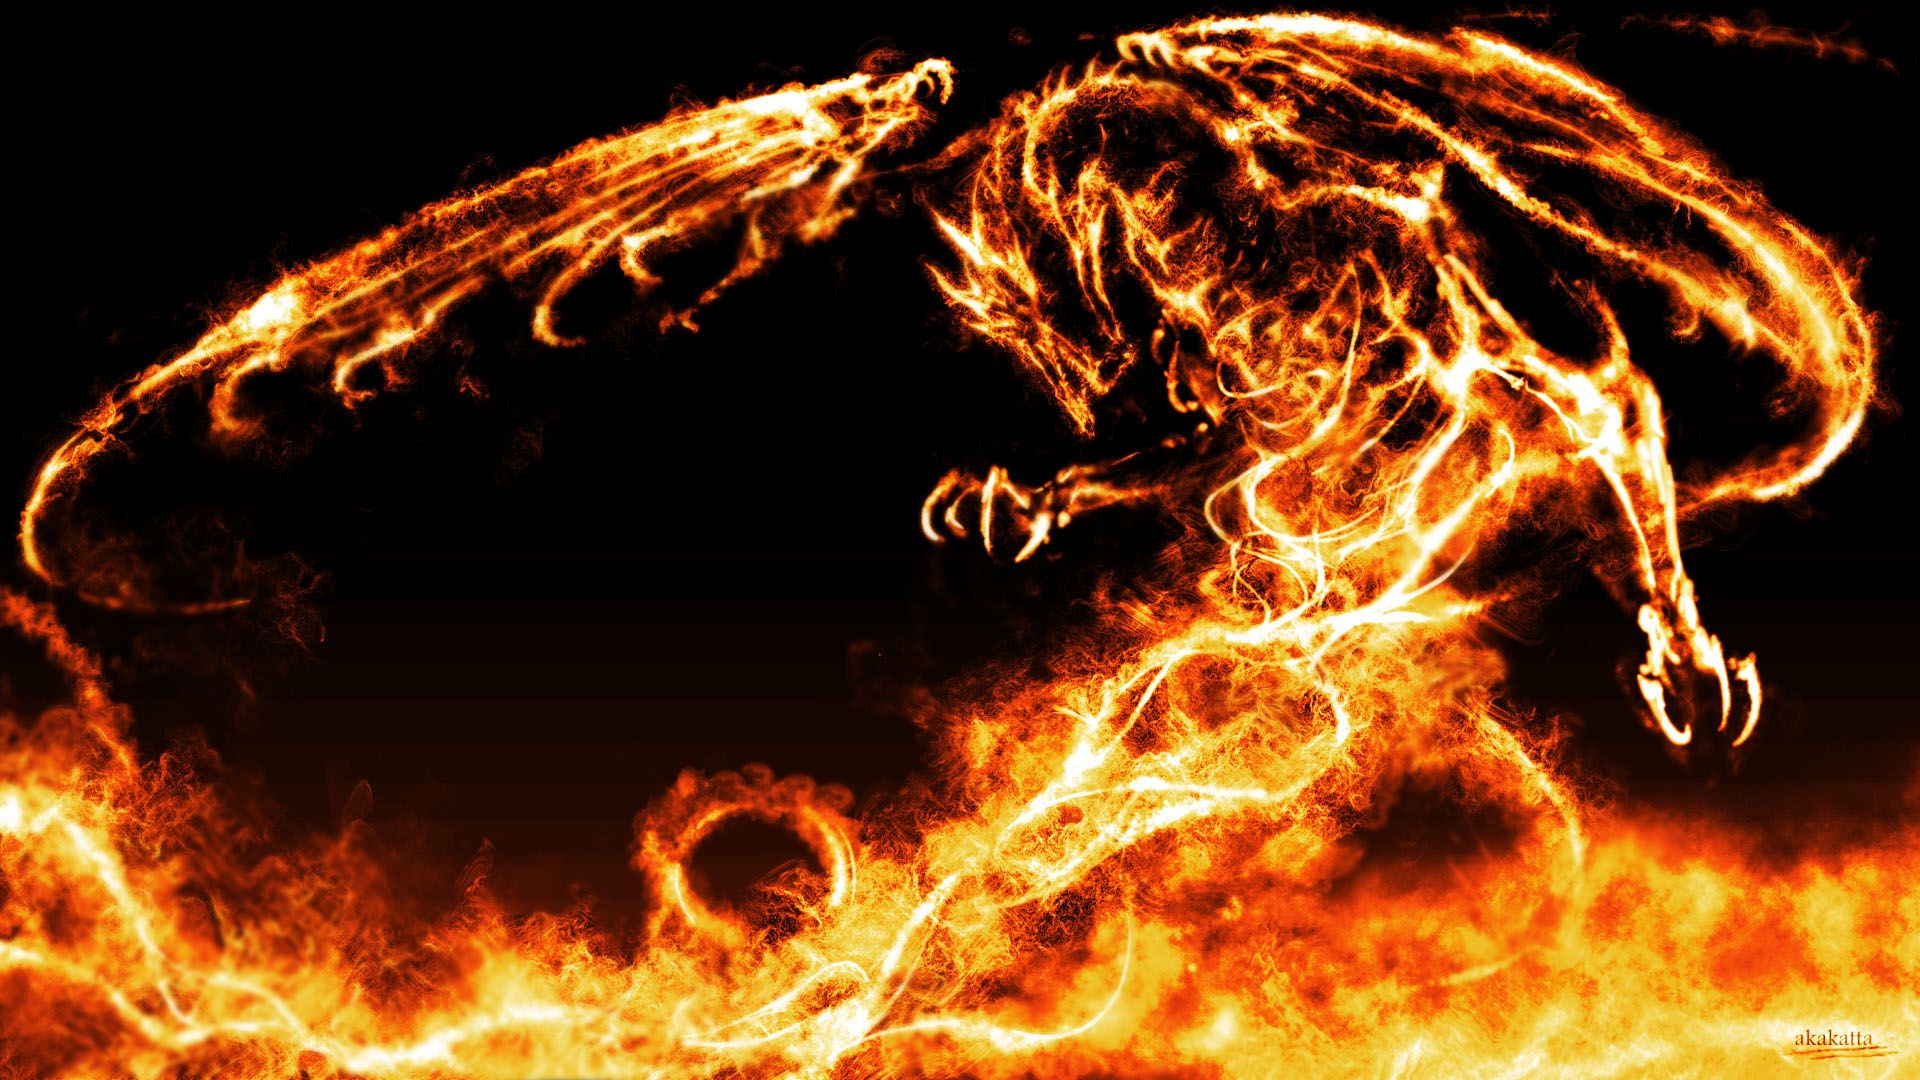 Dragon Wallpapers HD Download Free | Wallpapers, Backgrounds ...